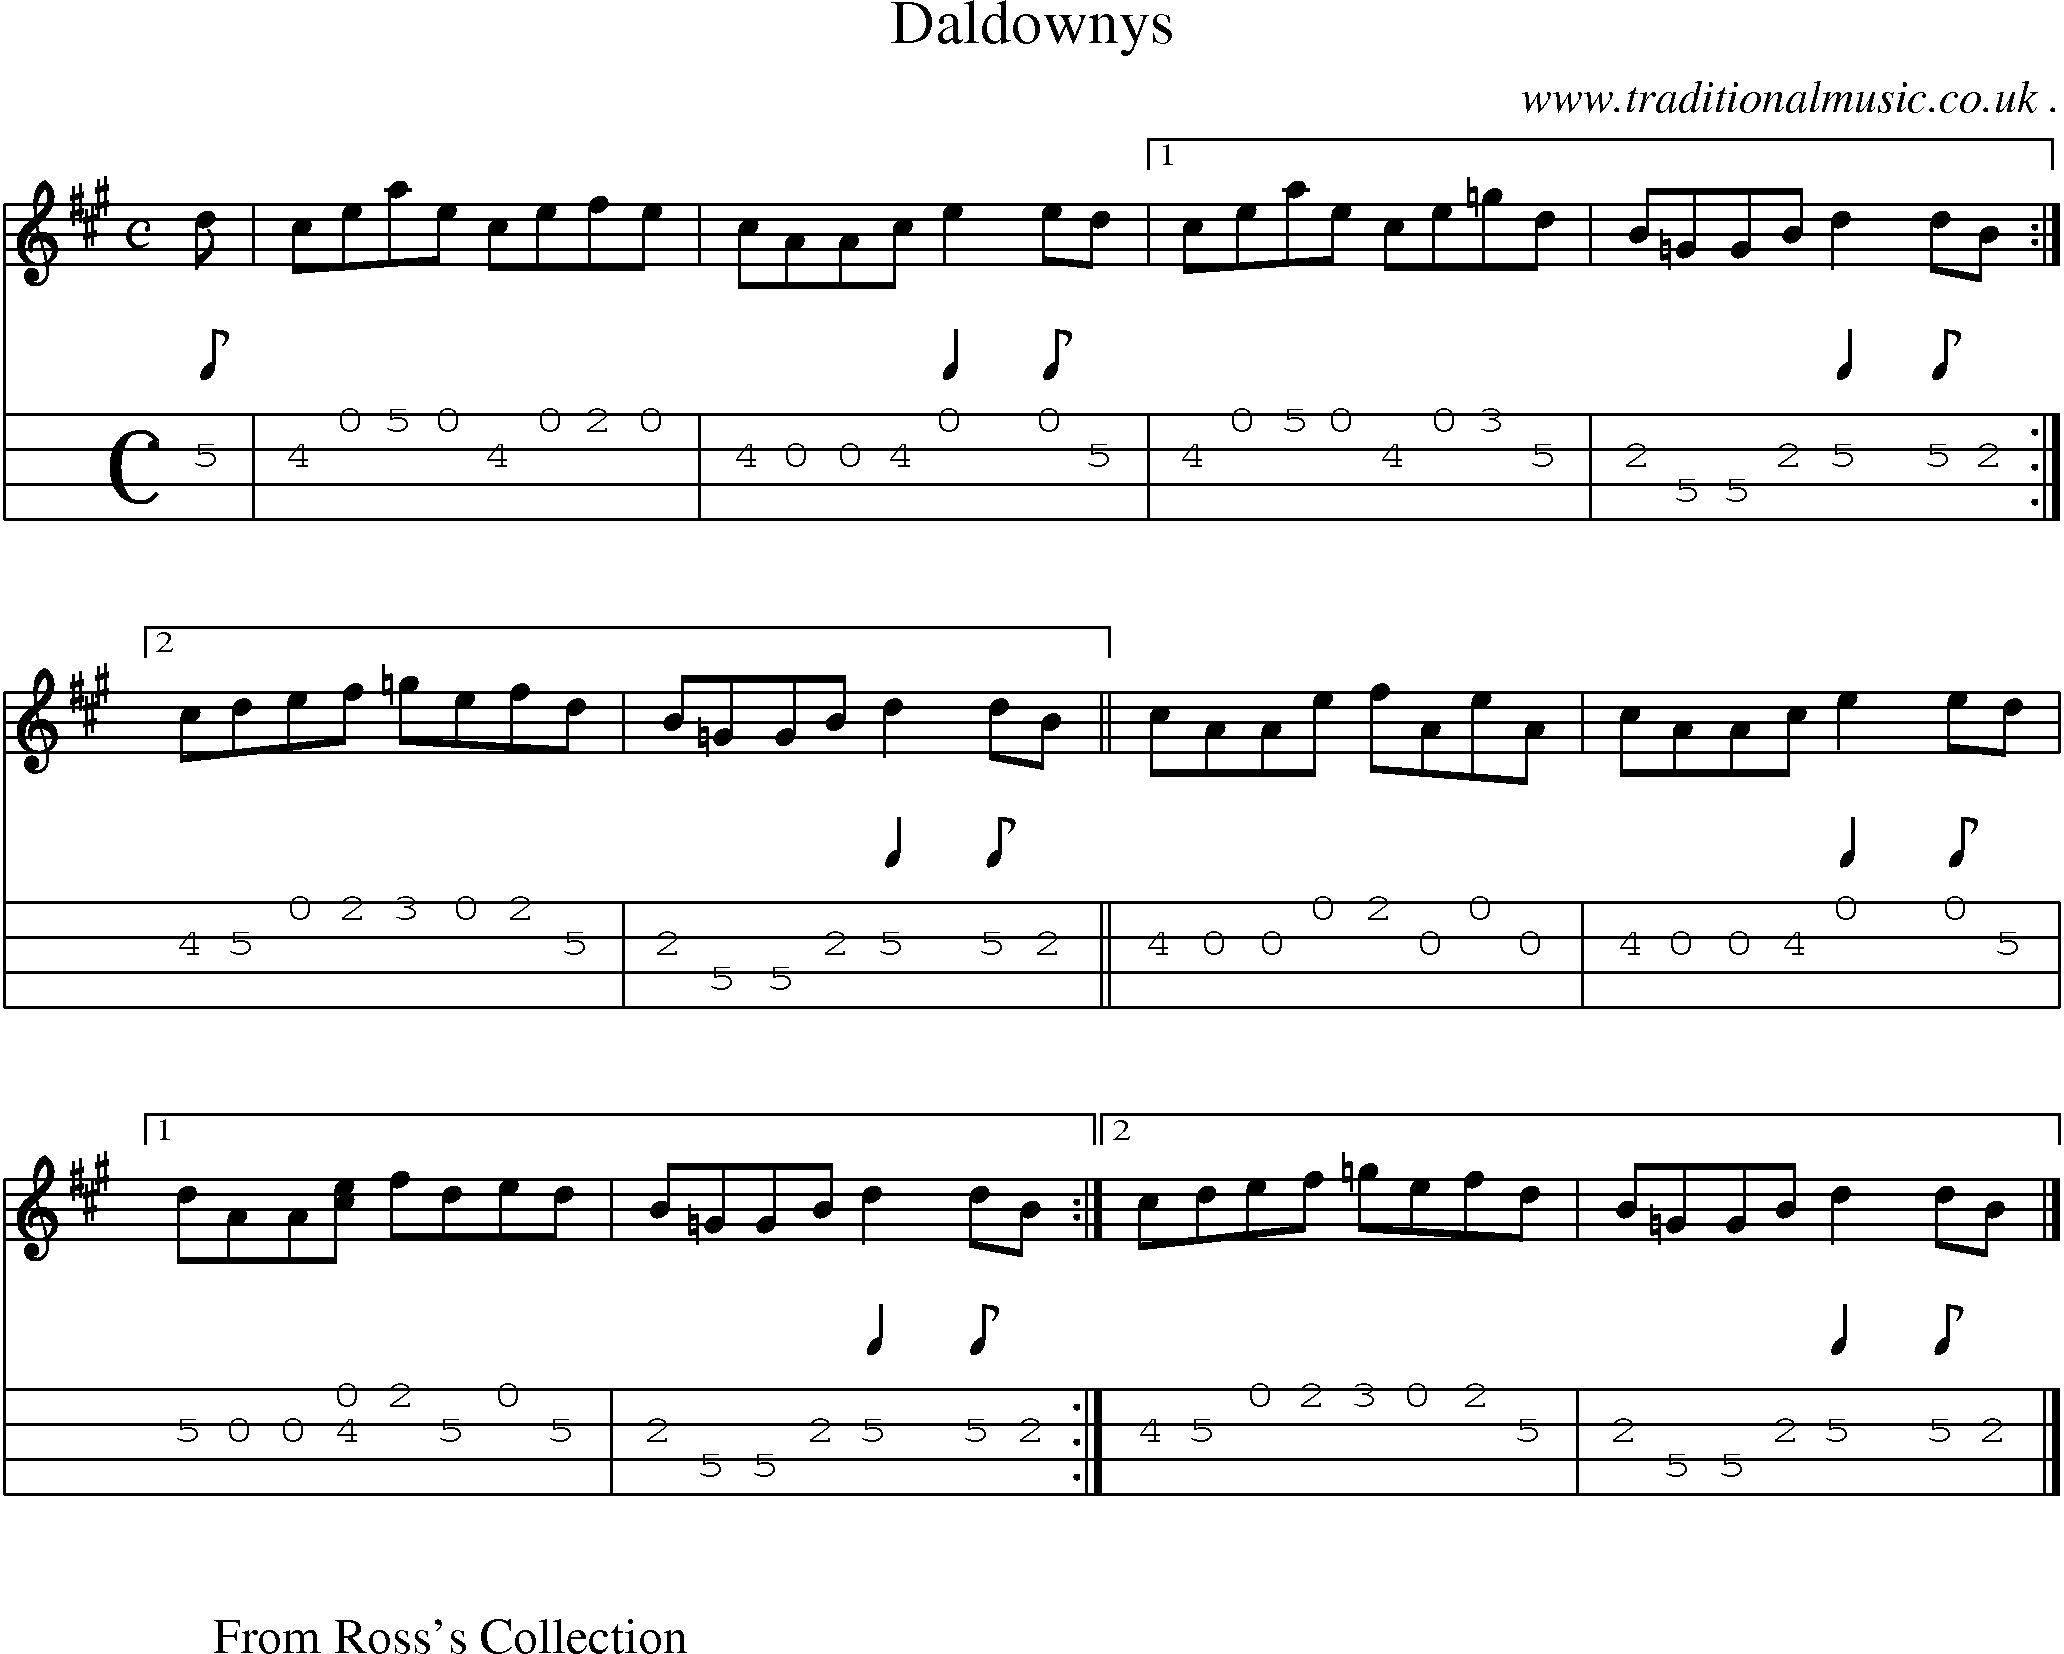 Sheet-music  score, Chords and Mandolin Tabs for Daldownys